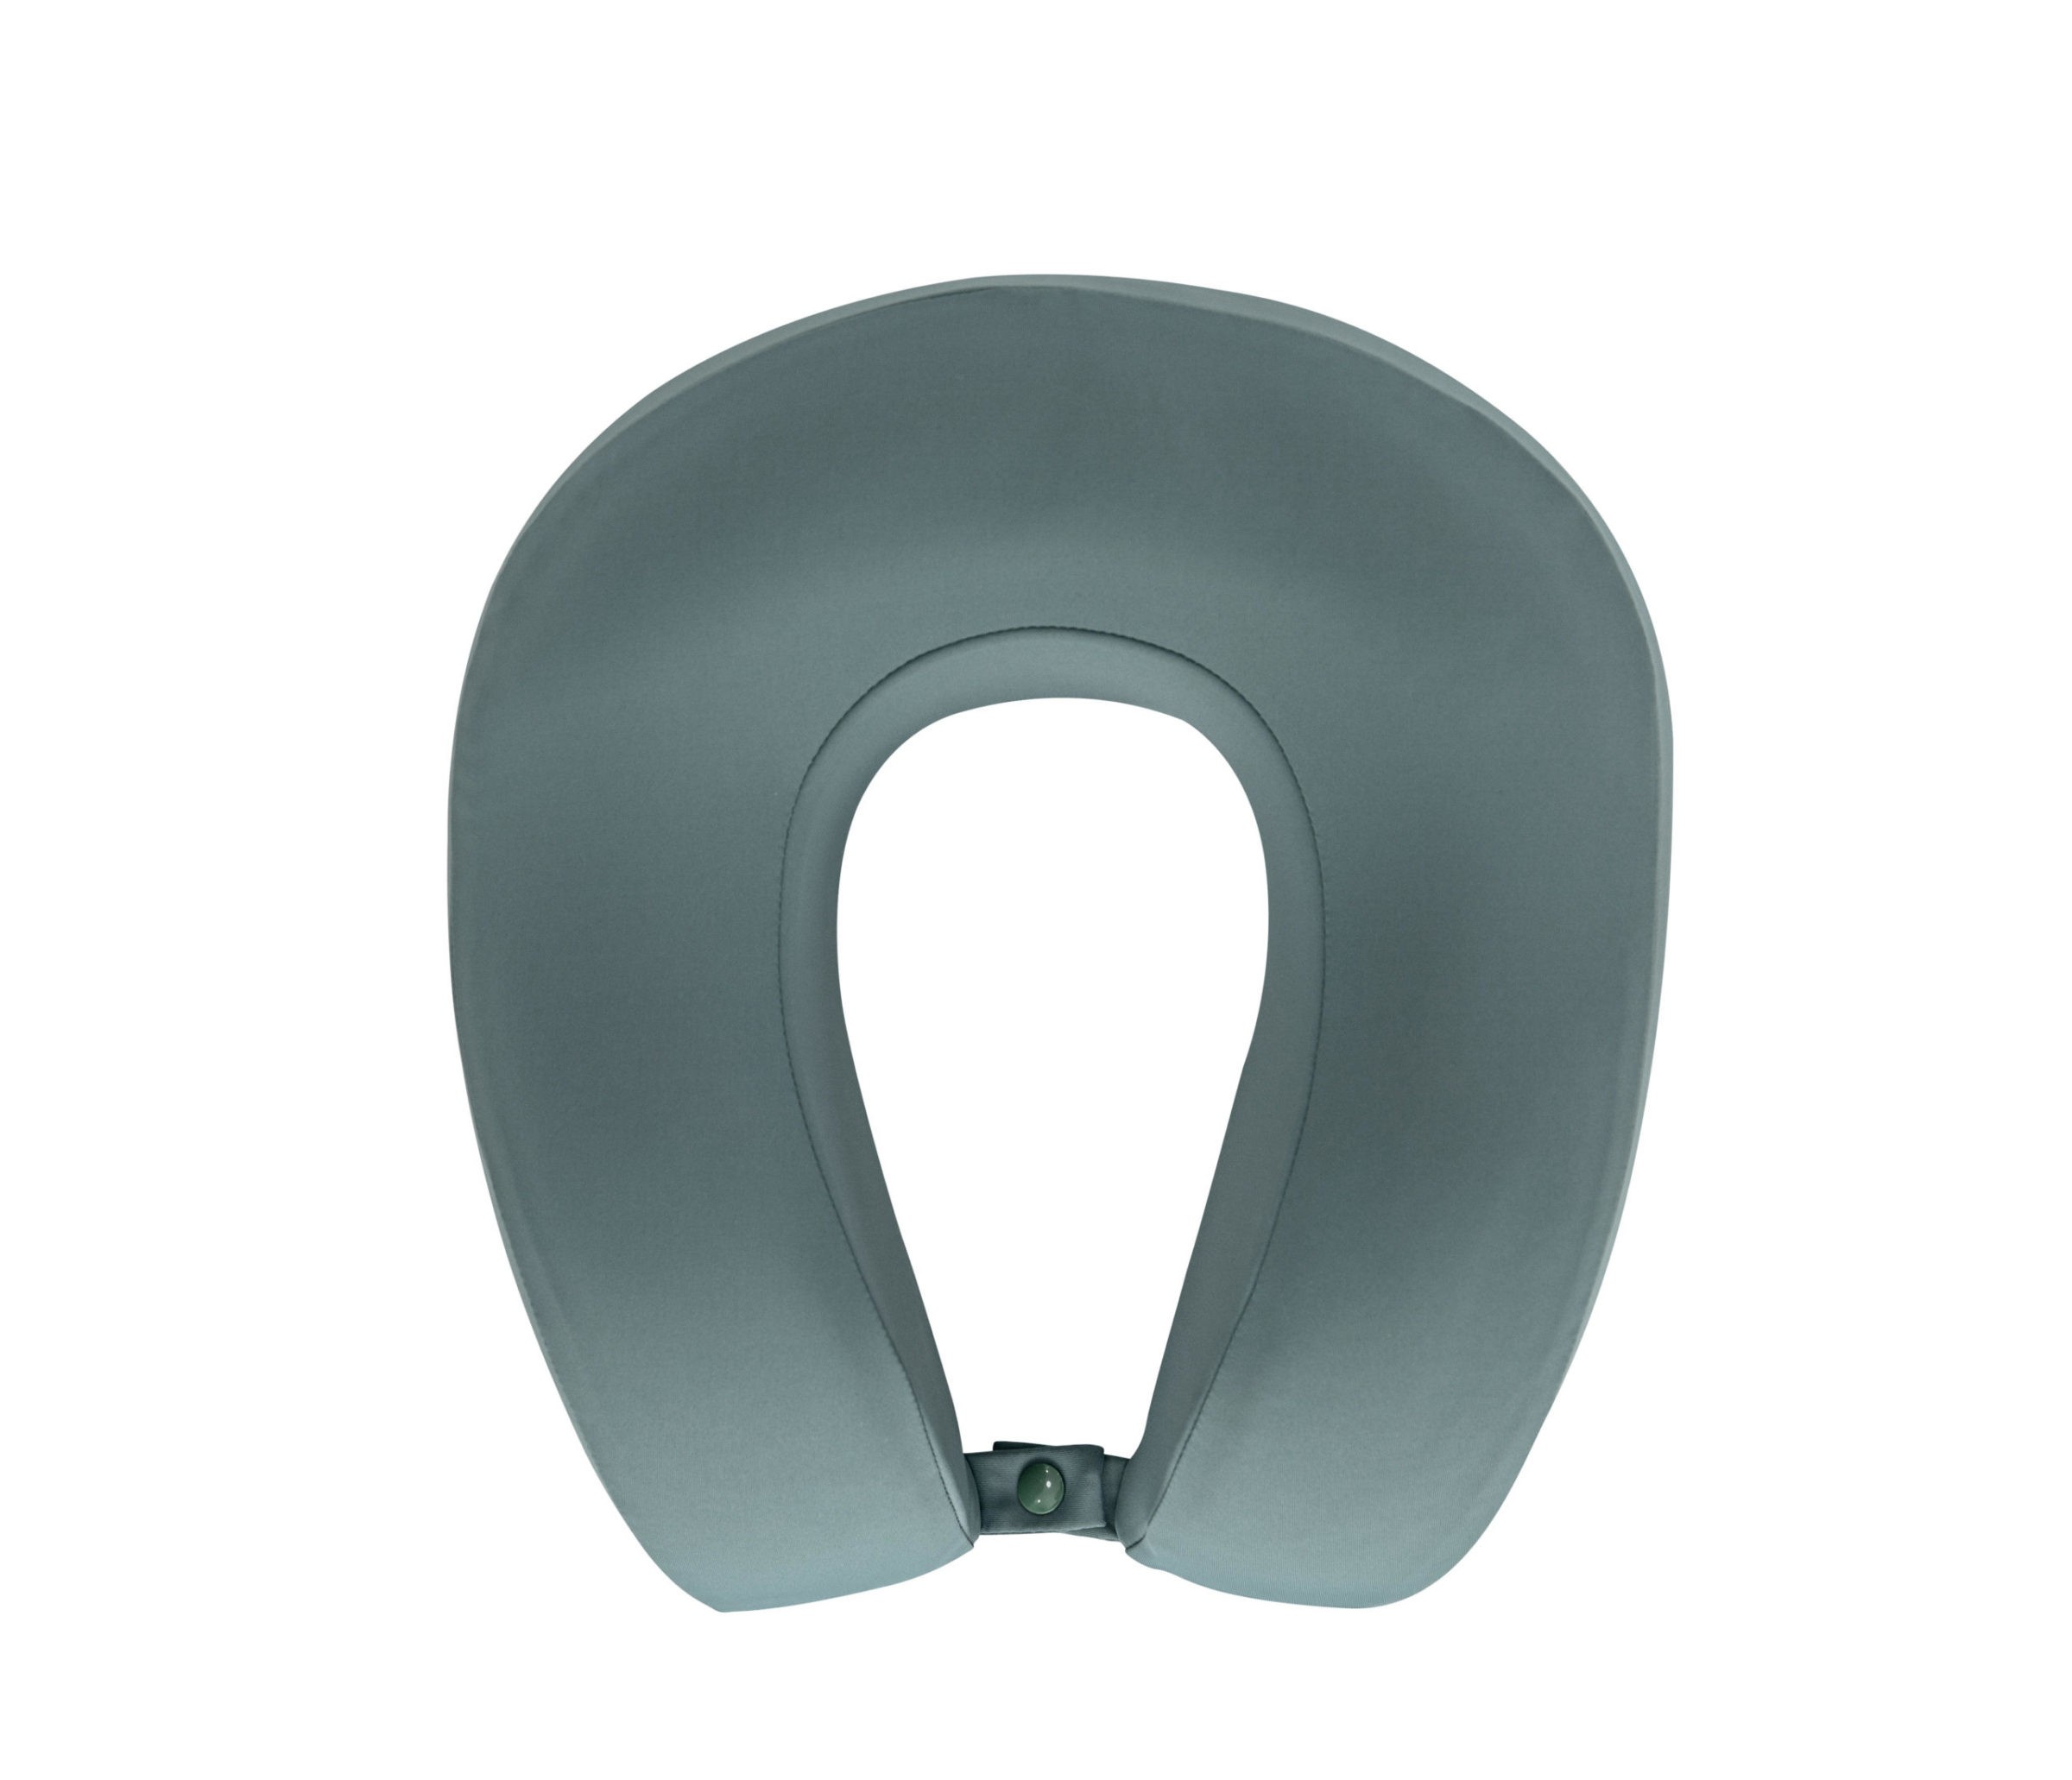 How to Use Travel Neck Pillow: Great on Airplanes – Everlasting Comfort